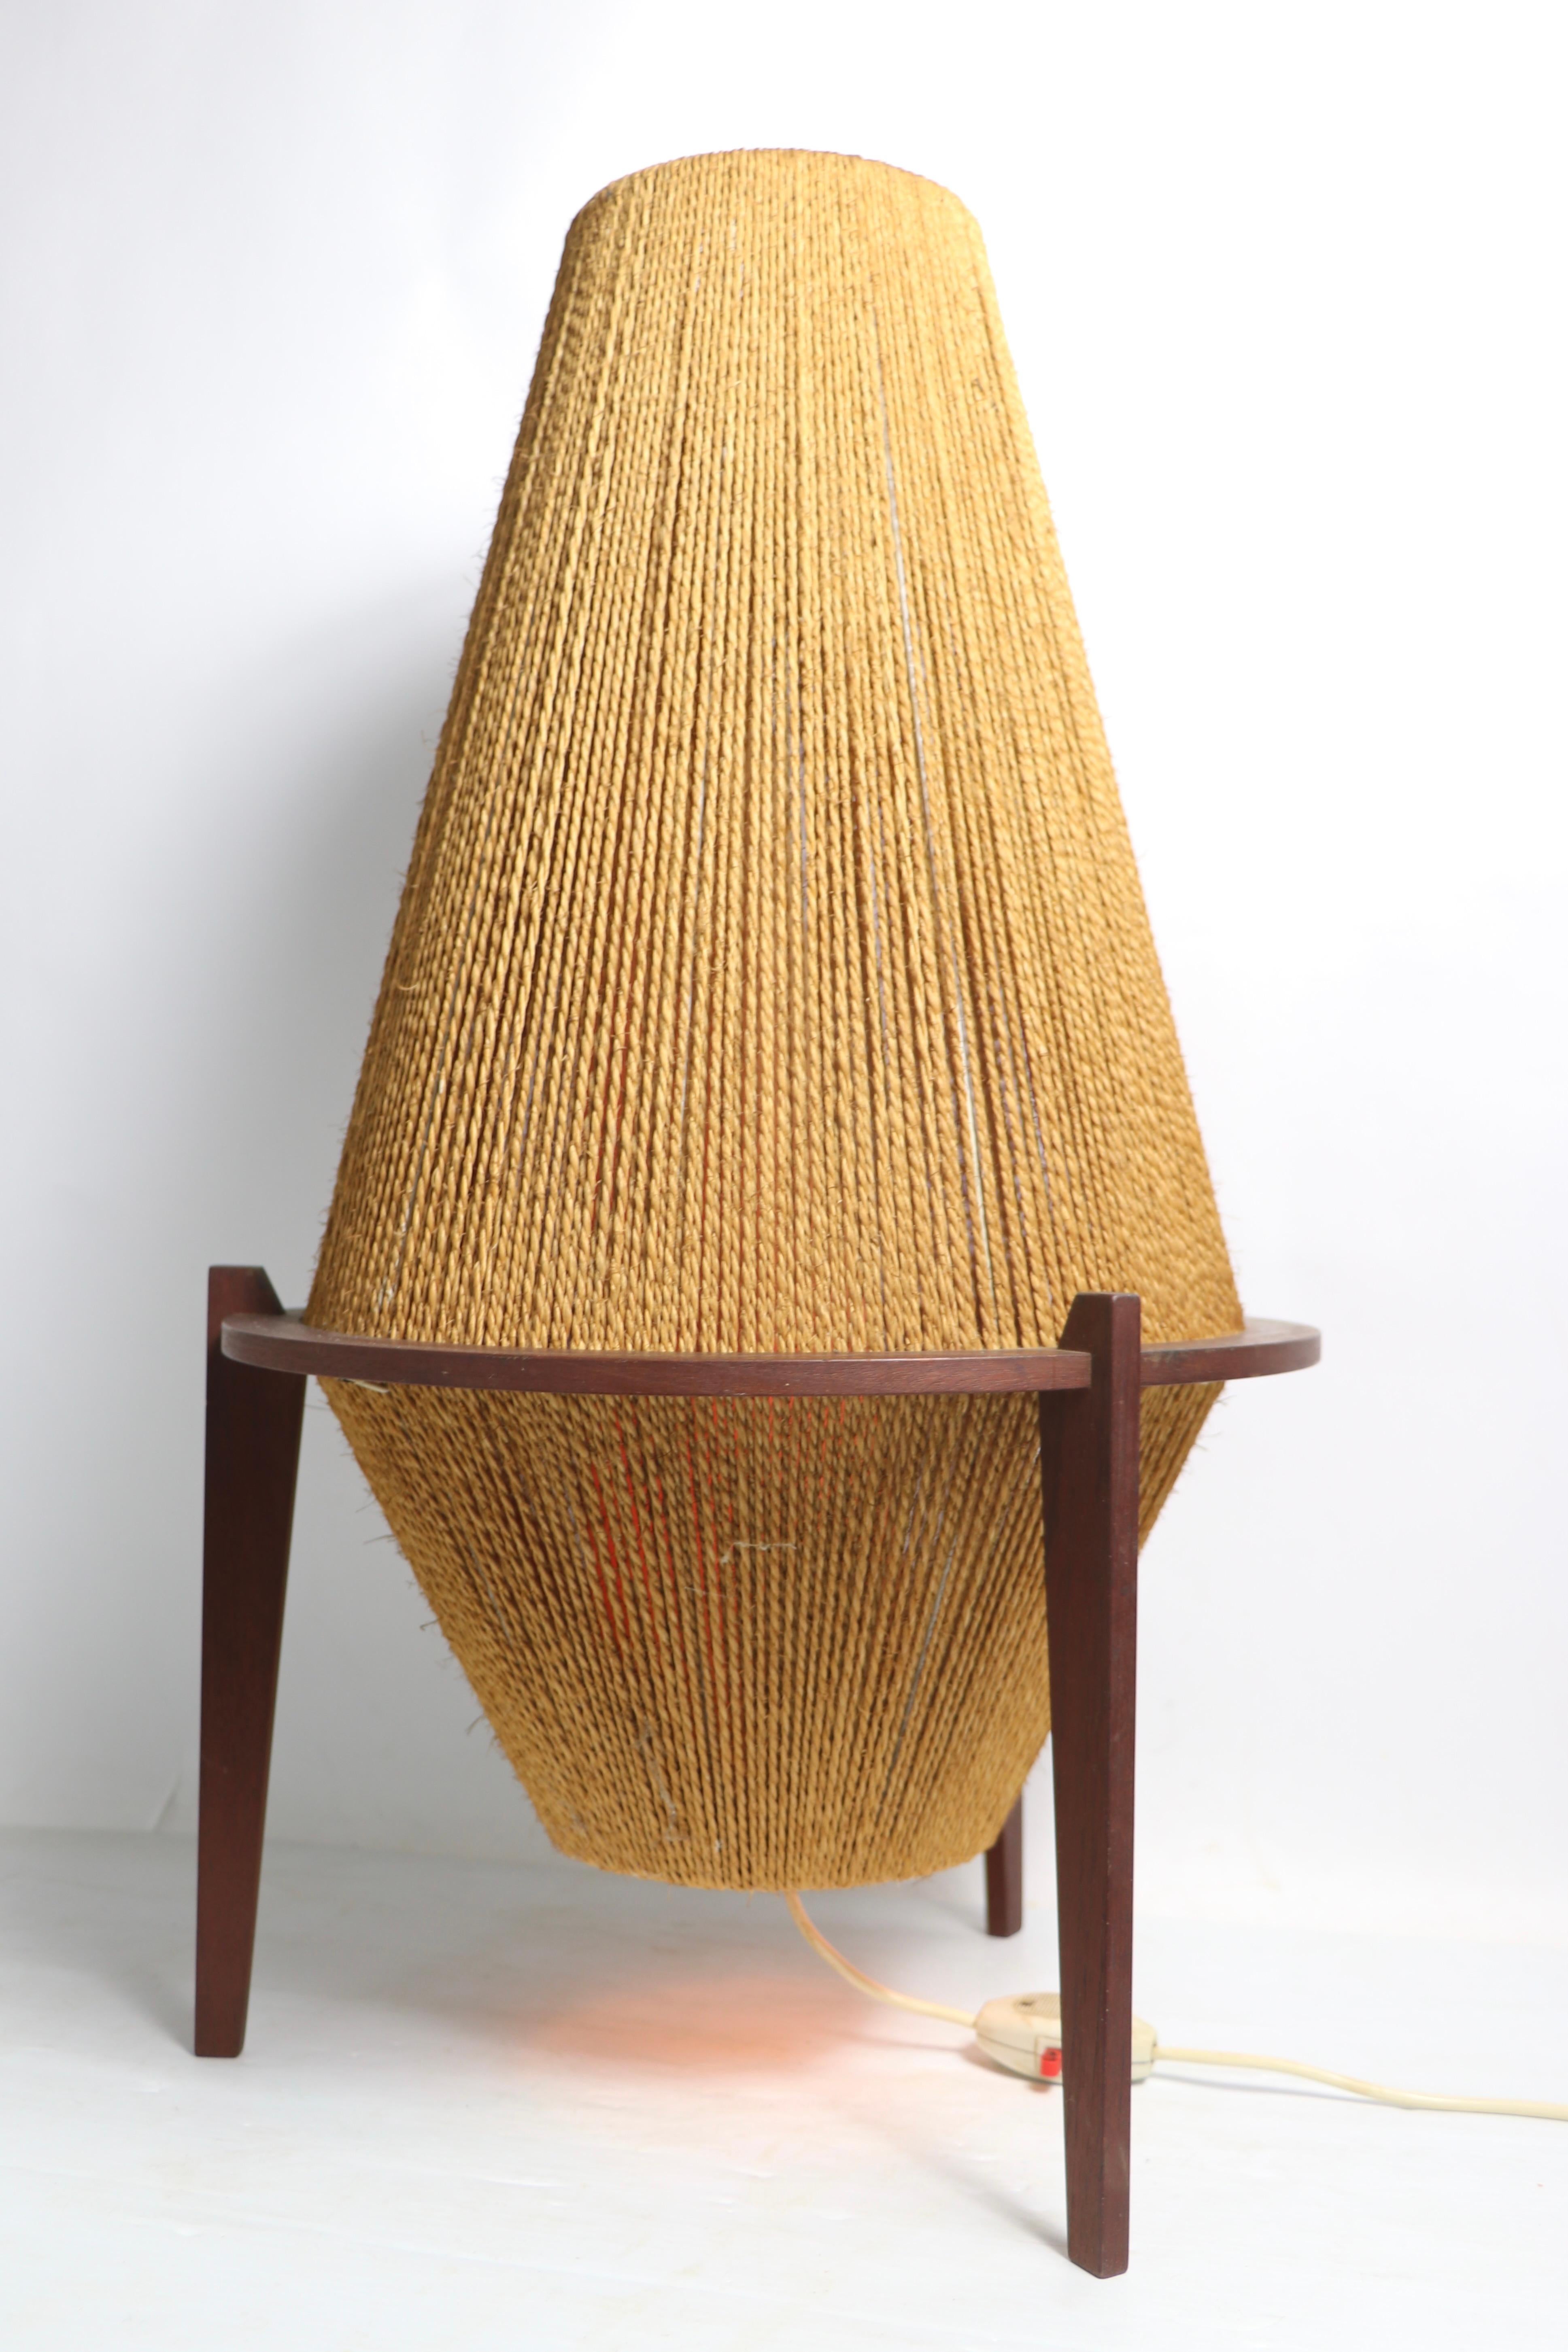 20th Century Mid Century String Lamp by I B Fabiasen for Fog and Morup